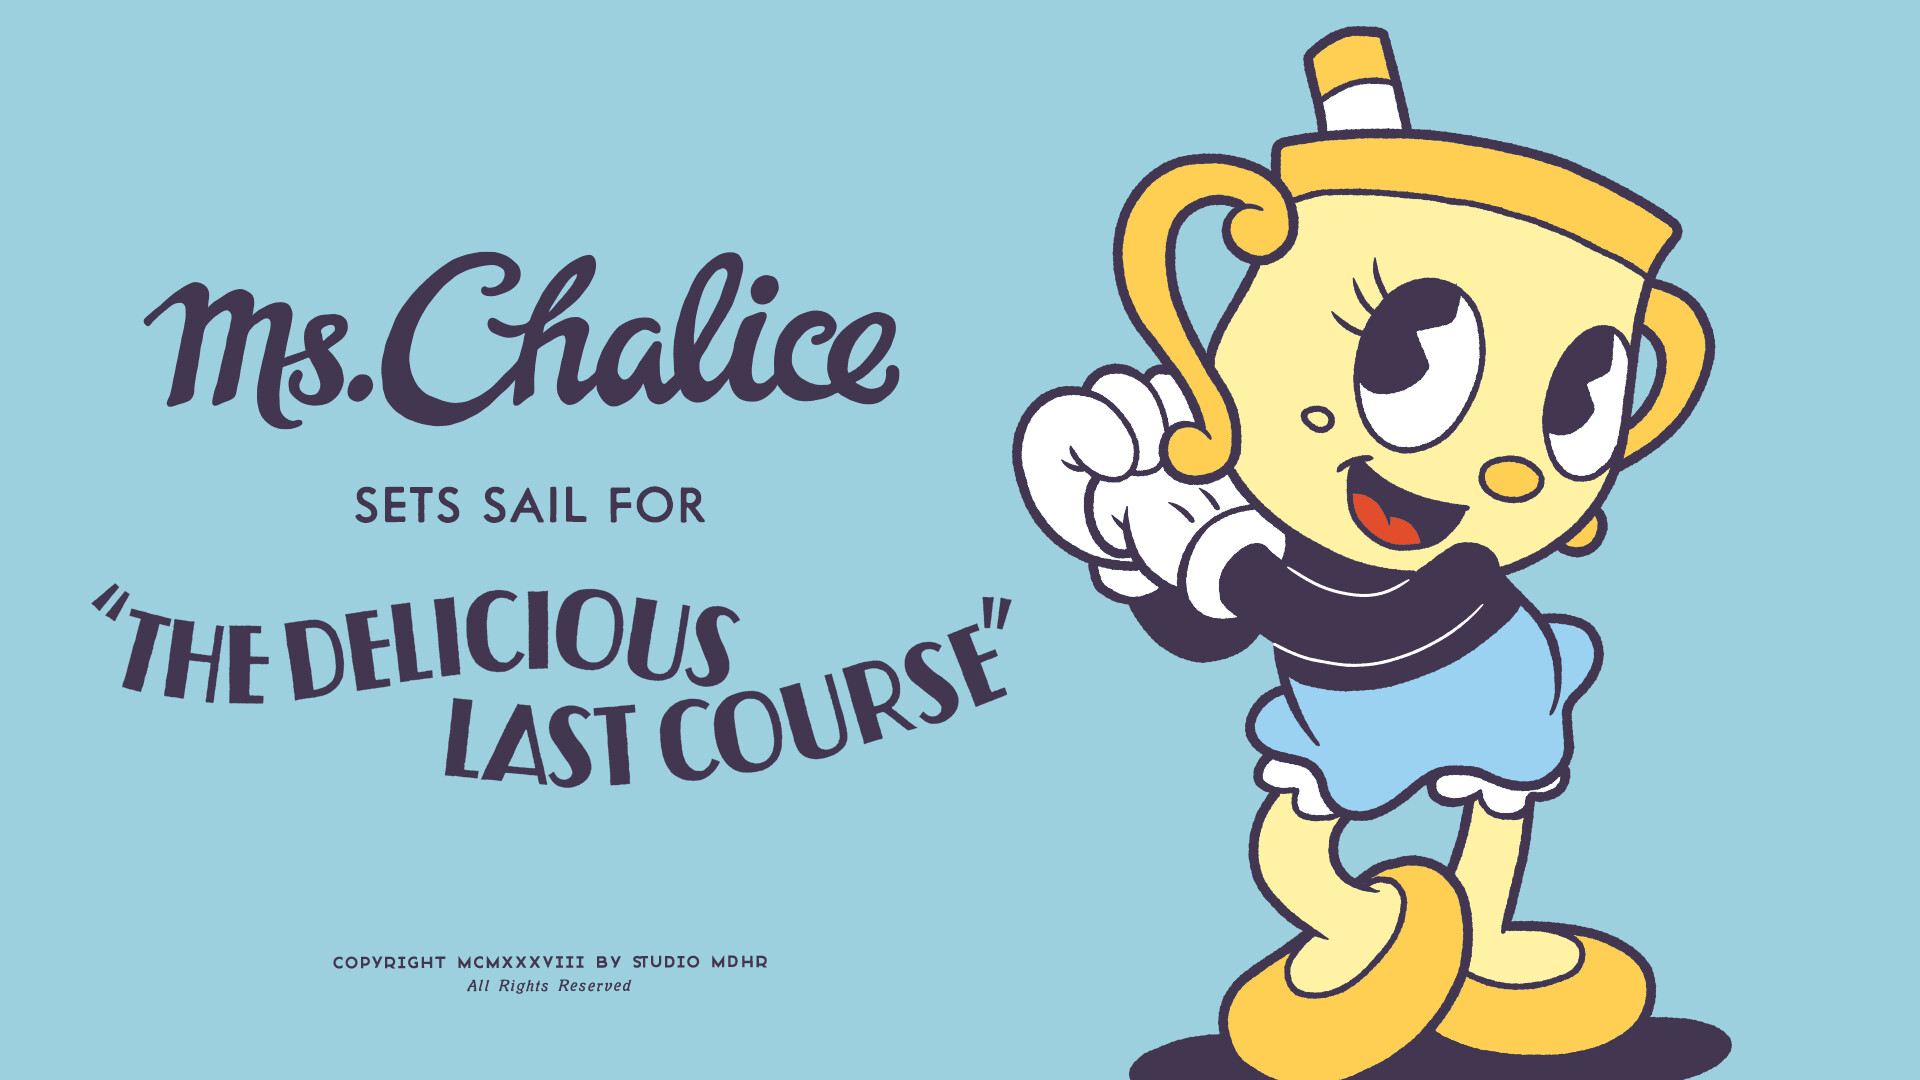 Cuphead - The Delicious Last Course Featured Screenshot #1